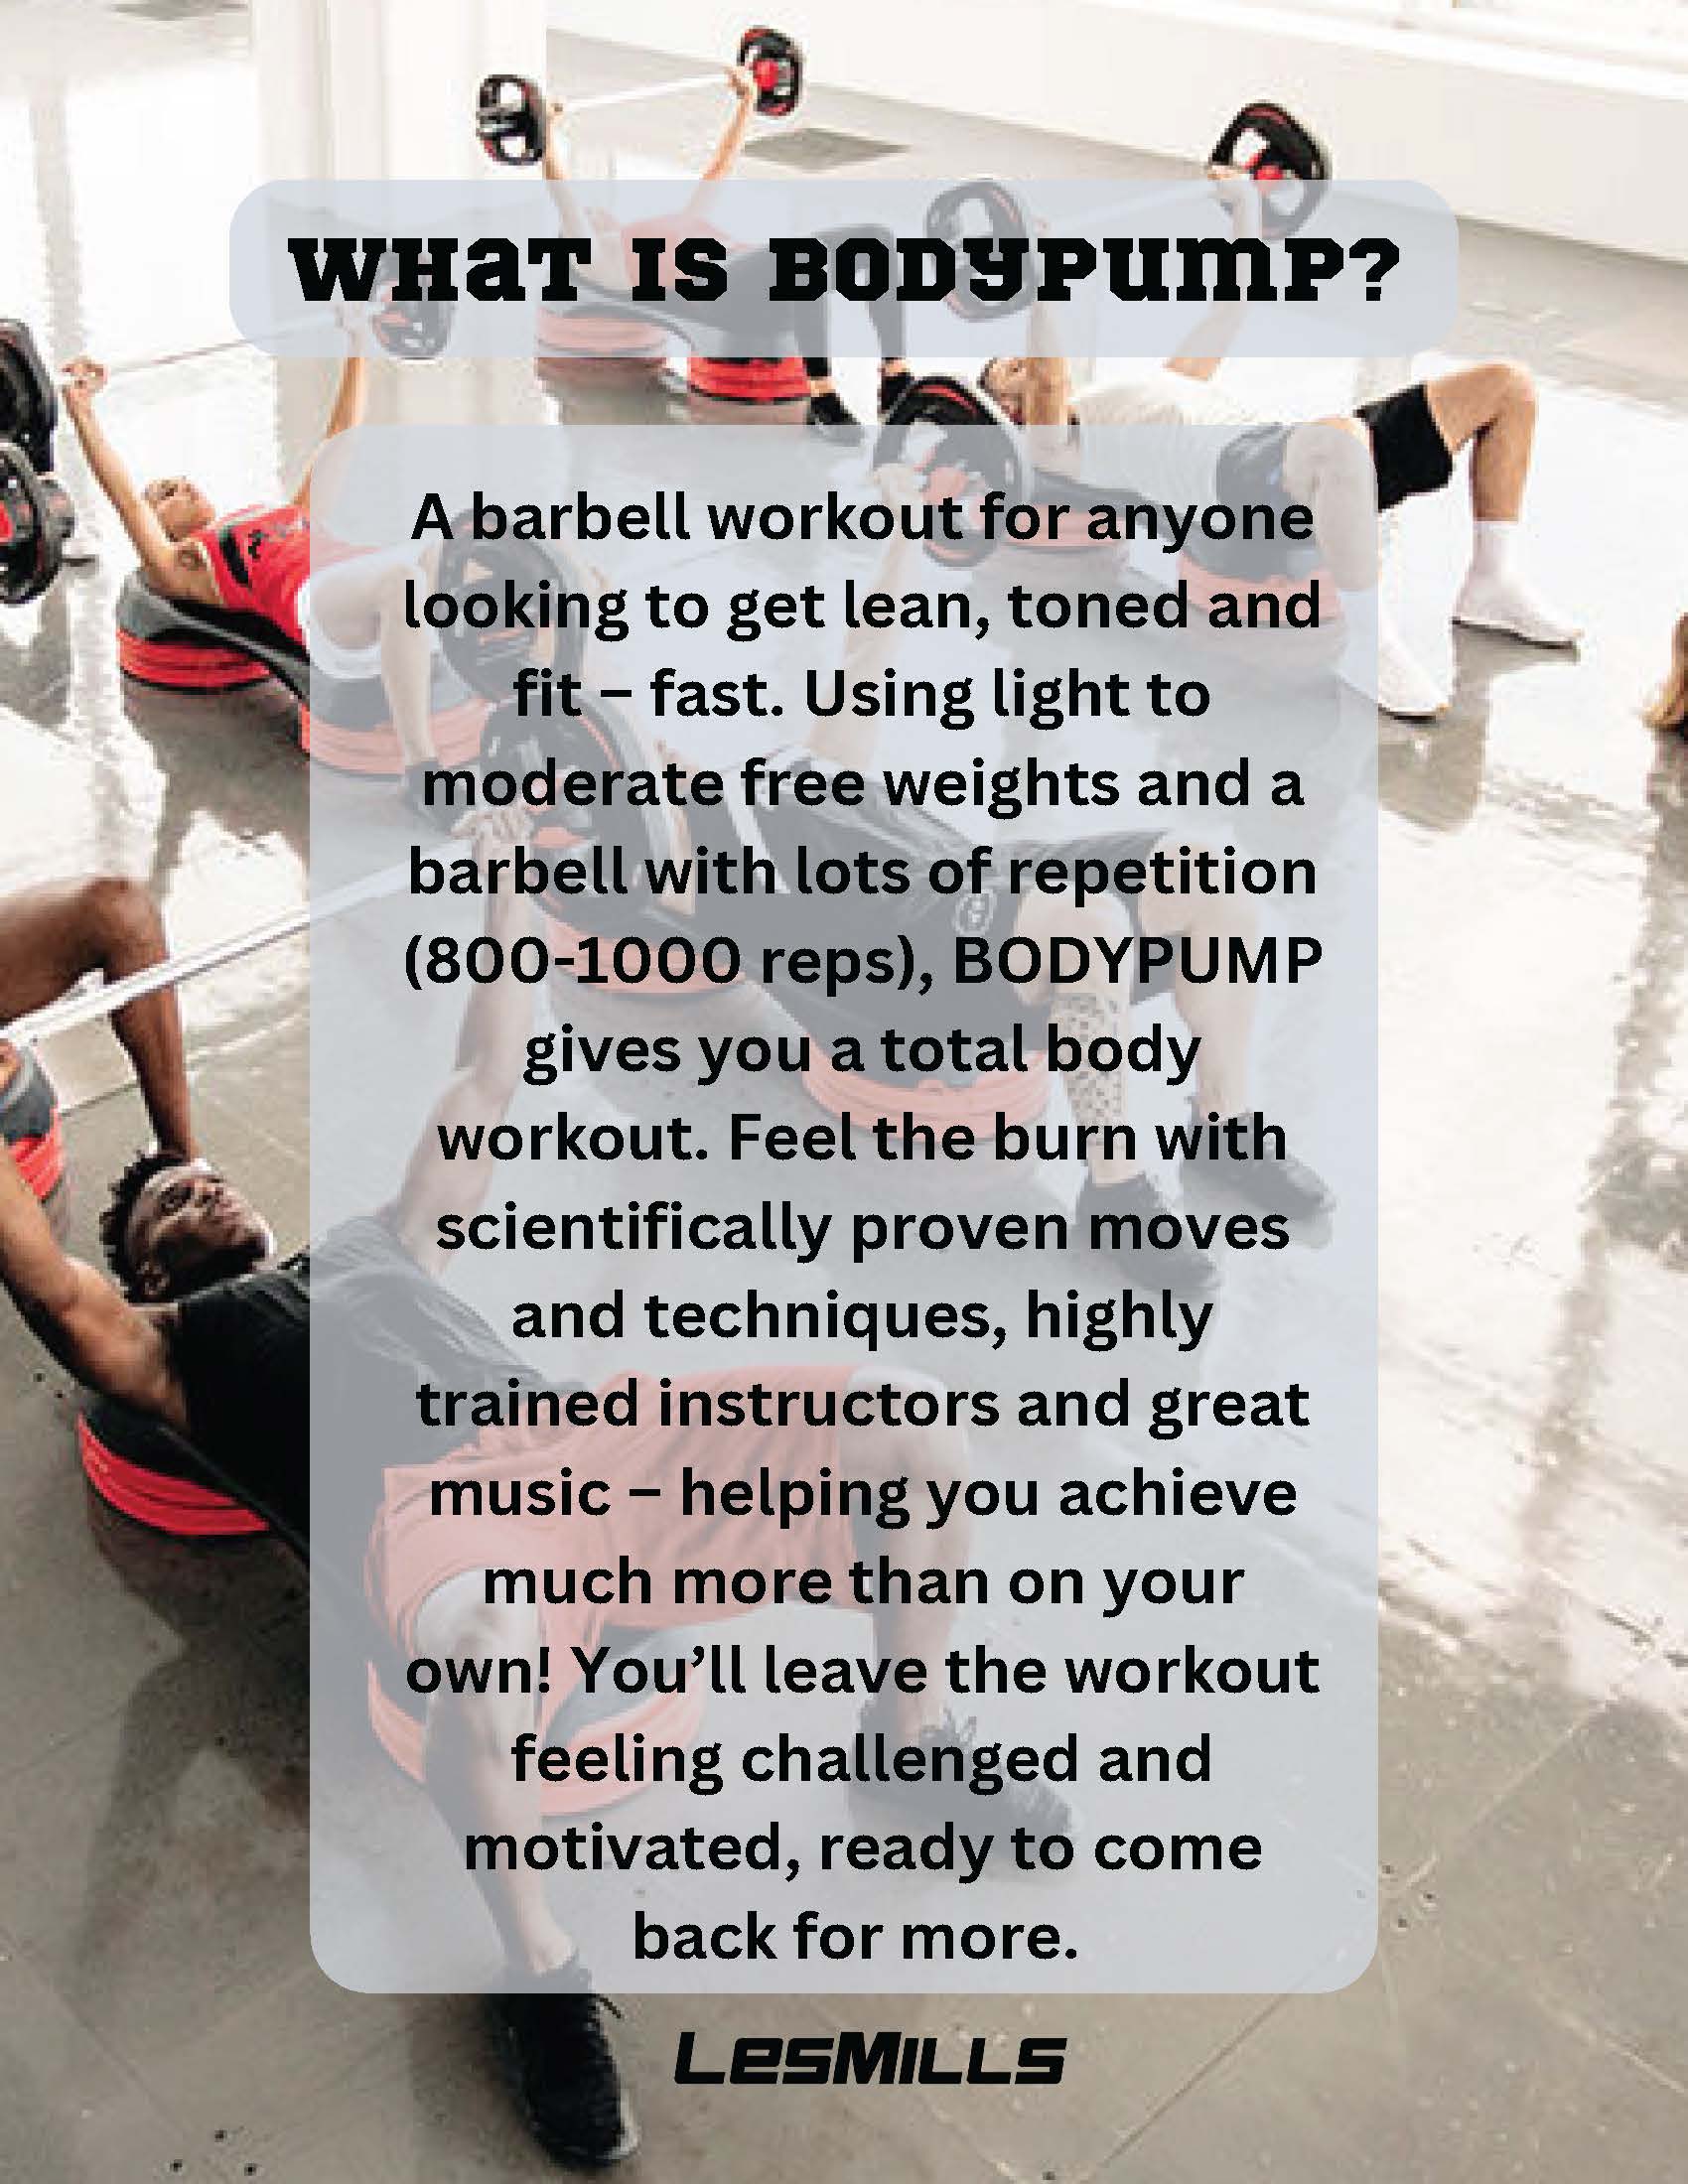 WHAT IS BODYPUMP?             A barbell workout for anyone looking to get lean, toned and fit - fast. Using light to moderate free weights and a barbell with lots of repetition             (800-1000 reps), BODYPUMP gives you a total body workout. Feel the burn with scientifically proven moves and techniques, highly trained instructors and great music - helping you achieve much more than on your own! You'll leave the workout feeling challenged and motivated, ready to come back for more.